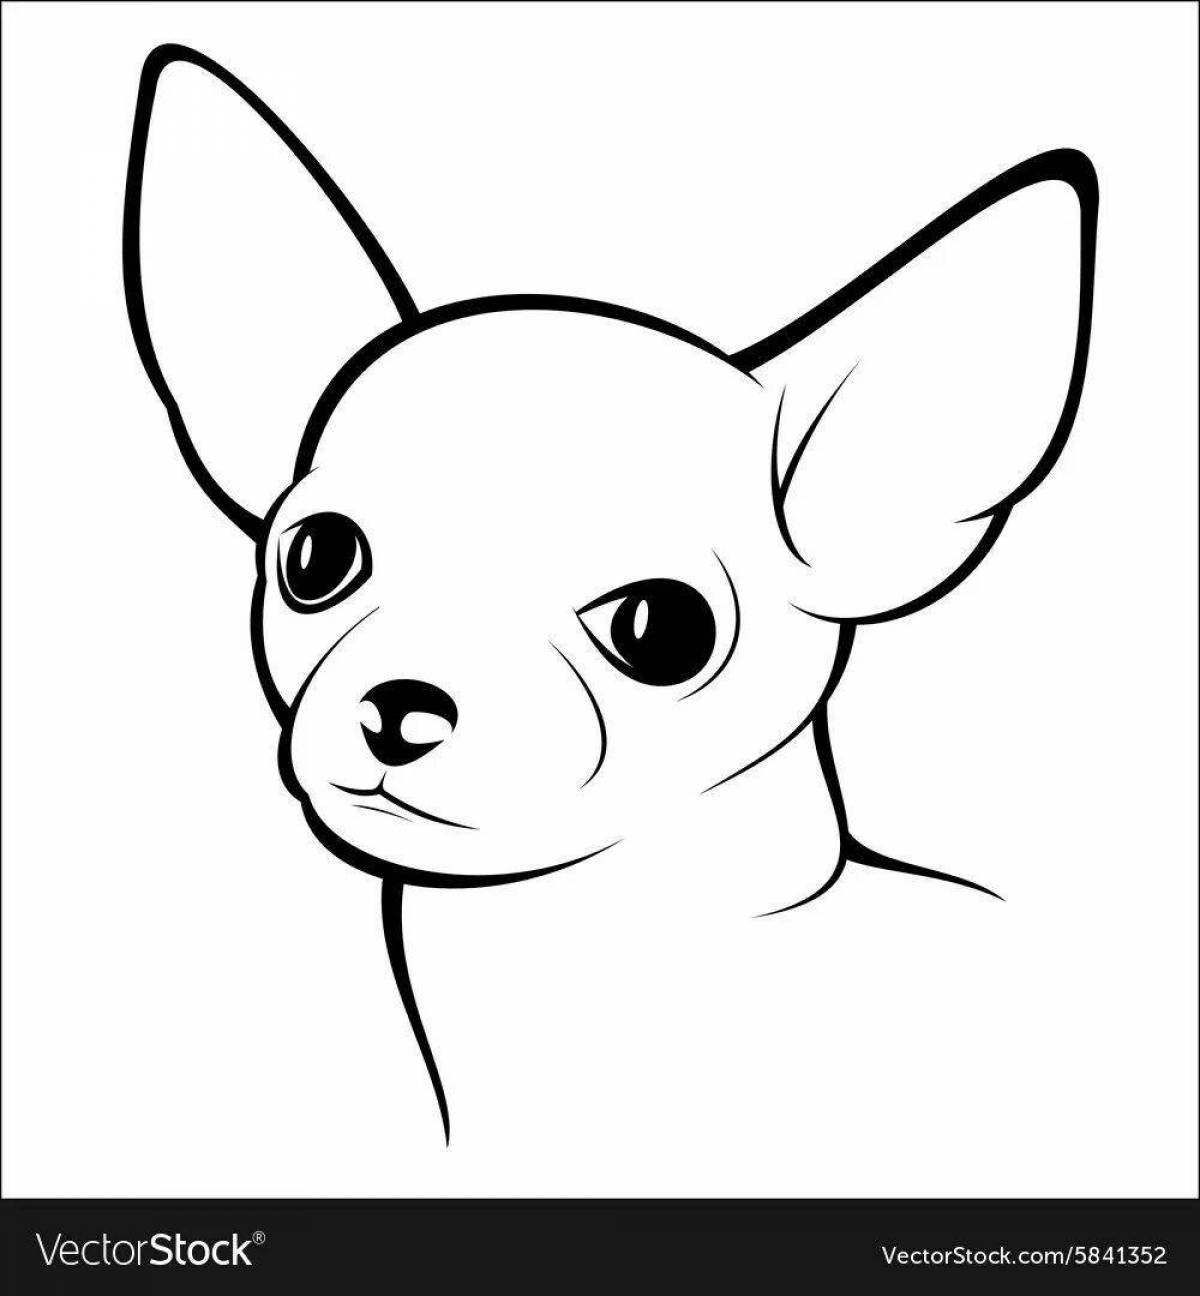 Coloring page cute chihuahua dog